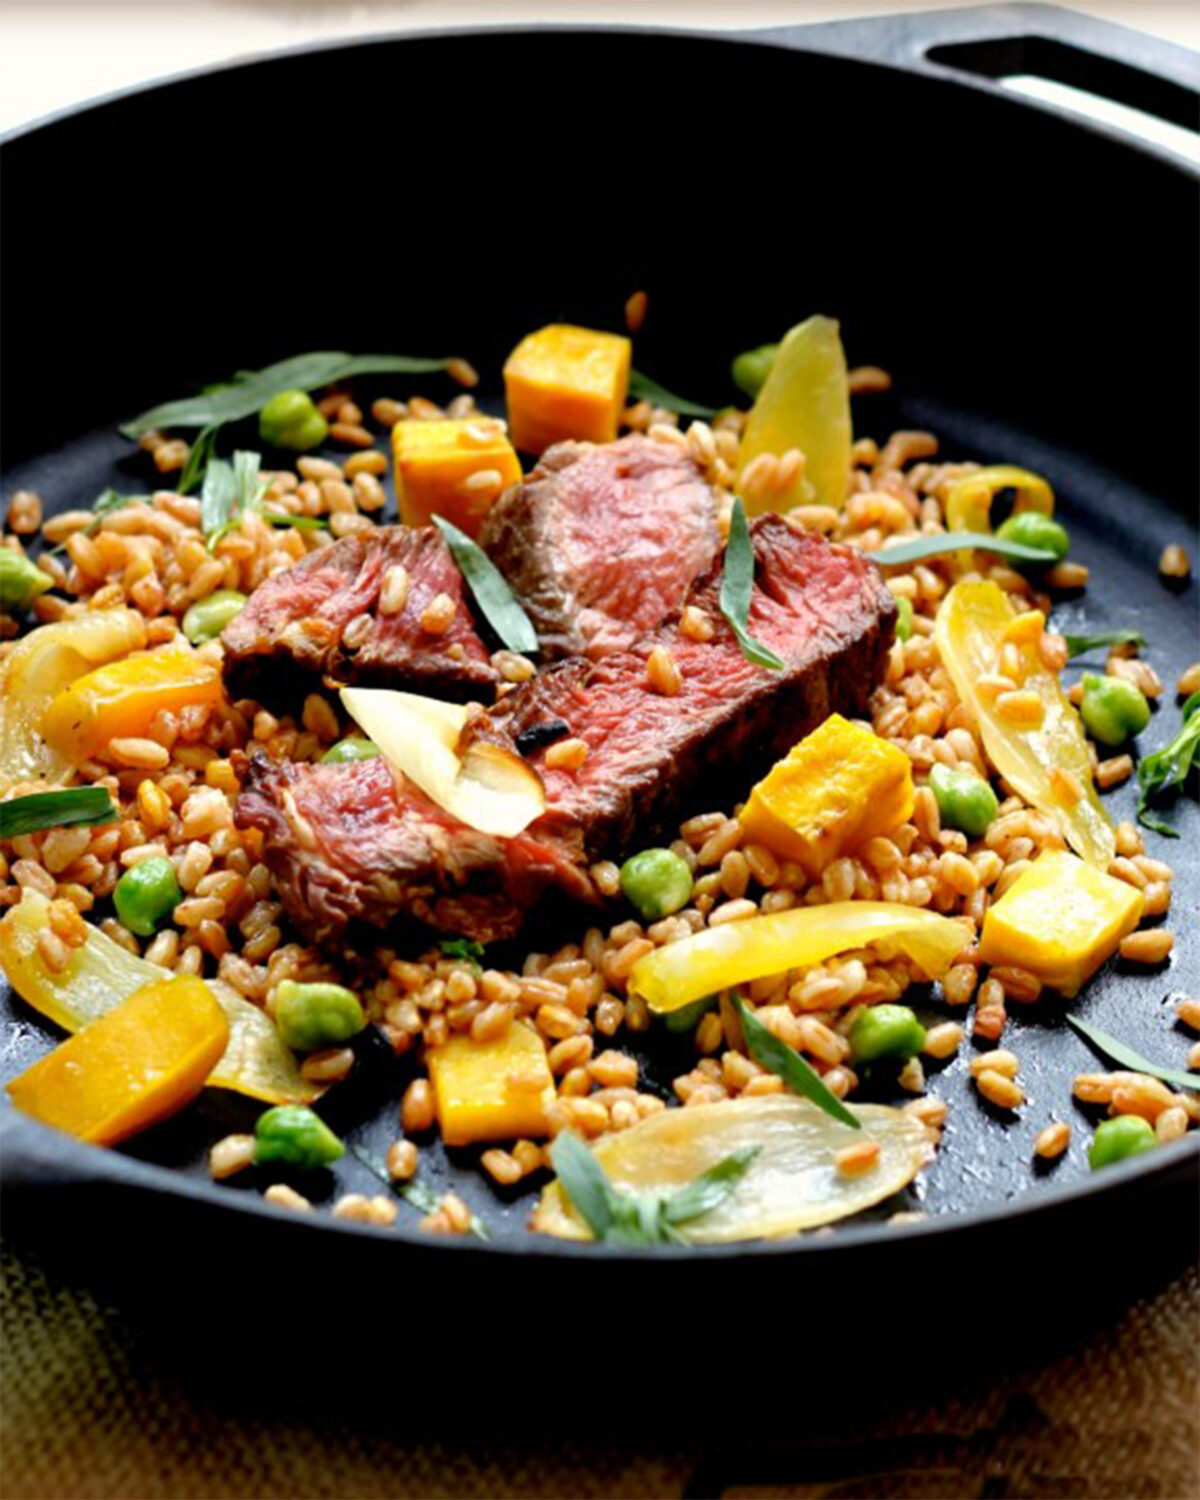 This recipe refreshes leftover steak with a bright lemony vinaigrette, the season's best farmers market produce, and hearty farro to round it out. (Lynda Balslev for Tastefood)